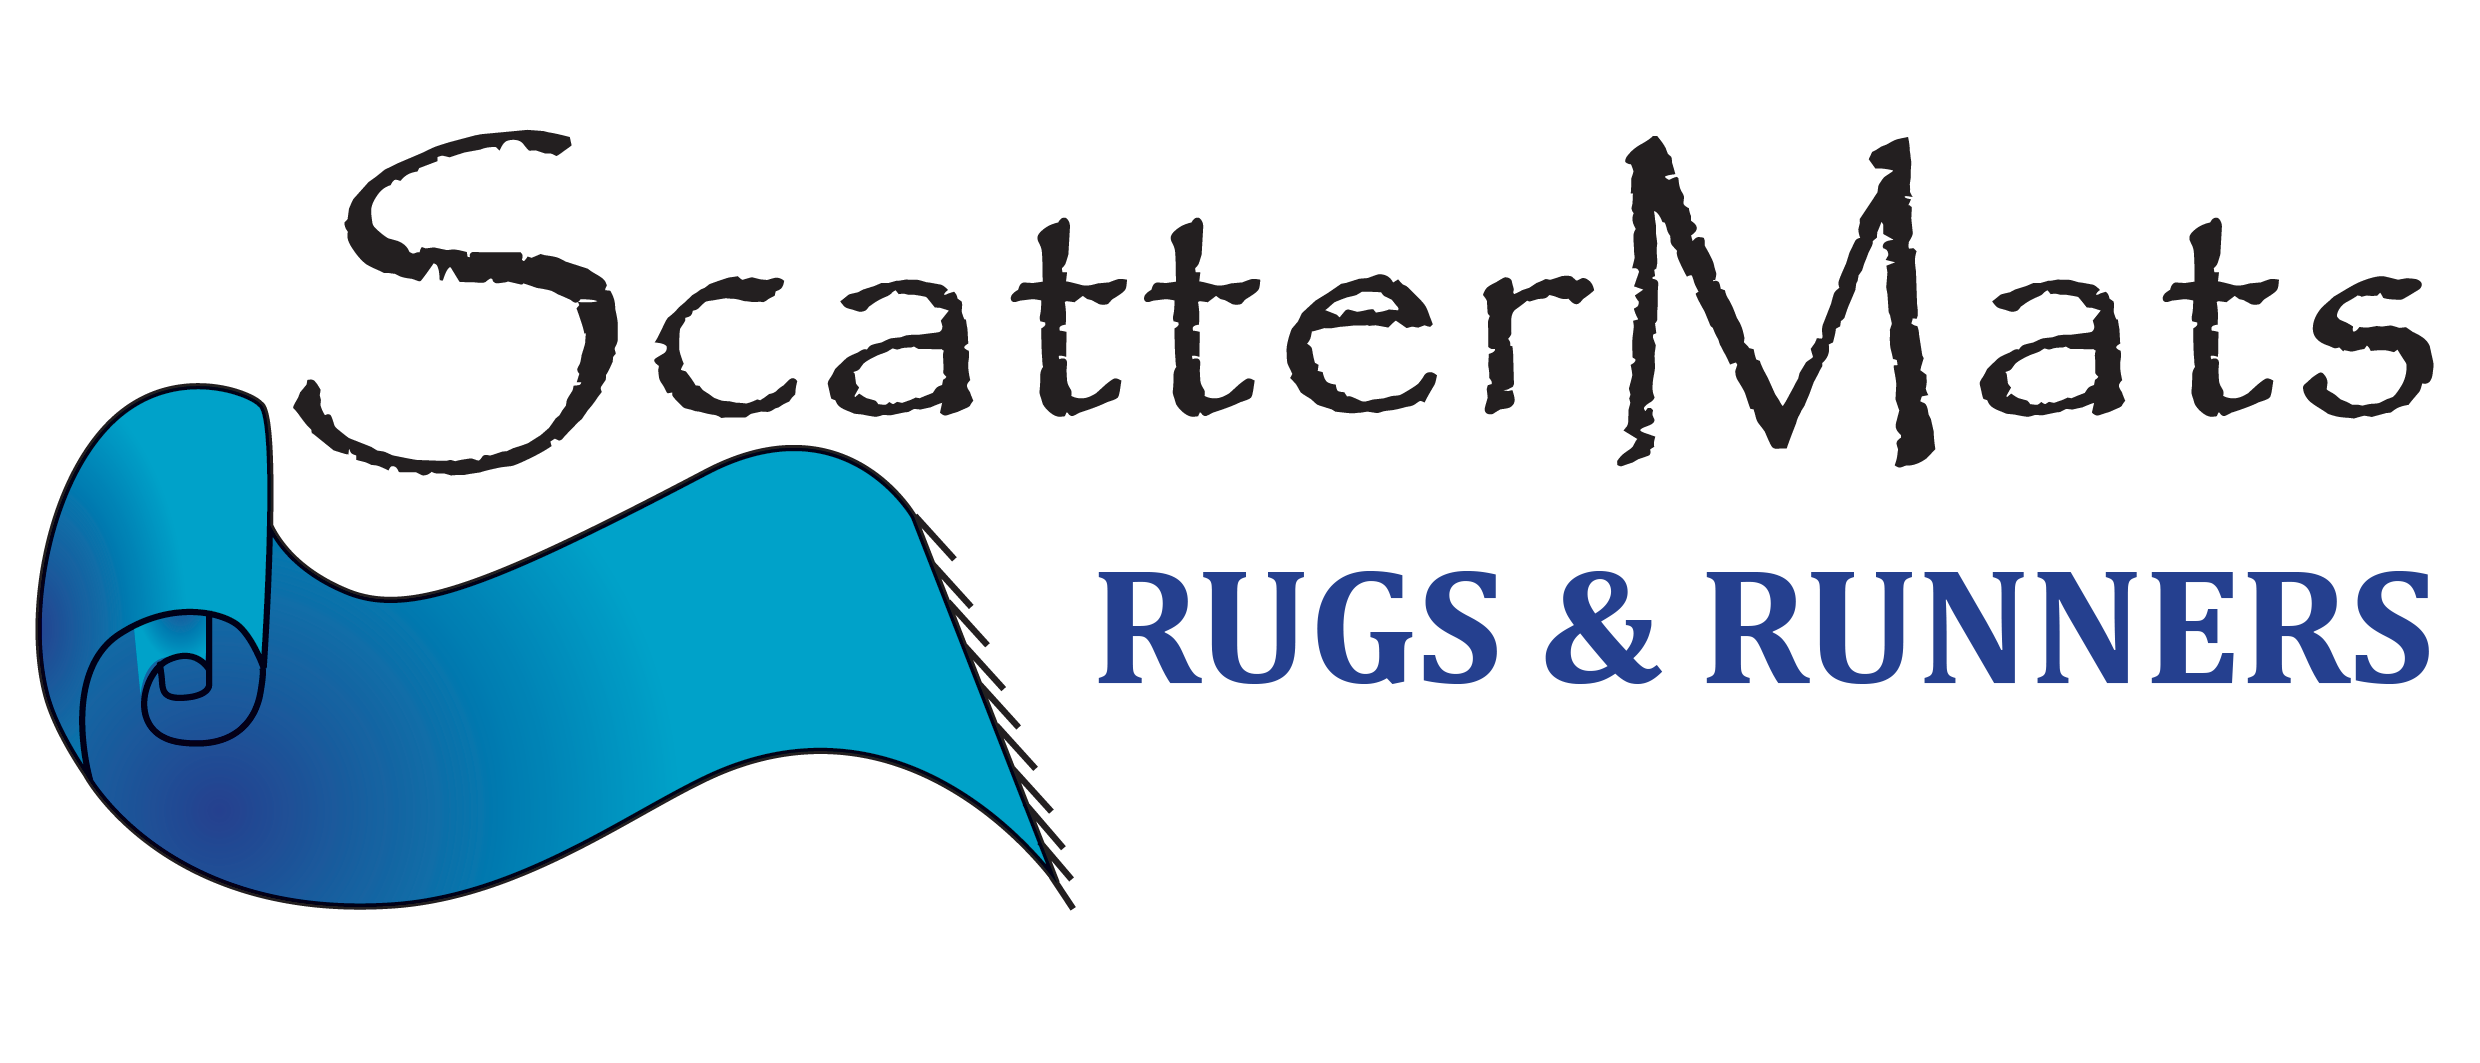 ScatterMats Rugs & Runners